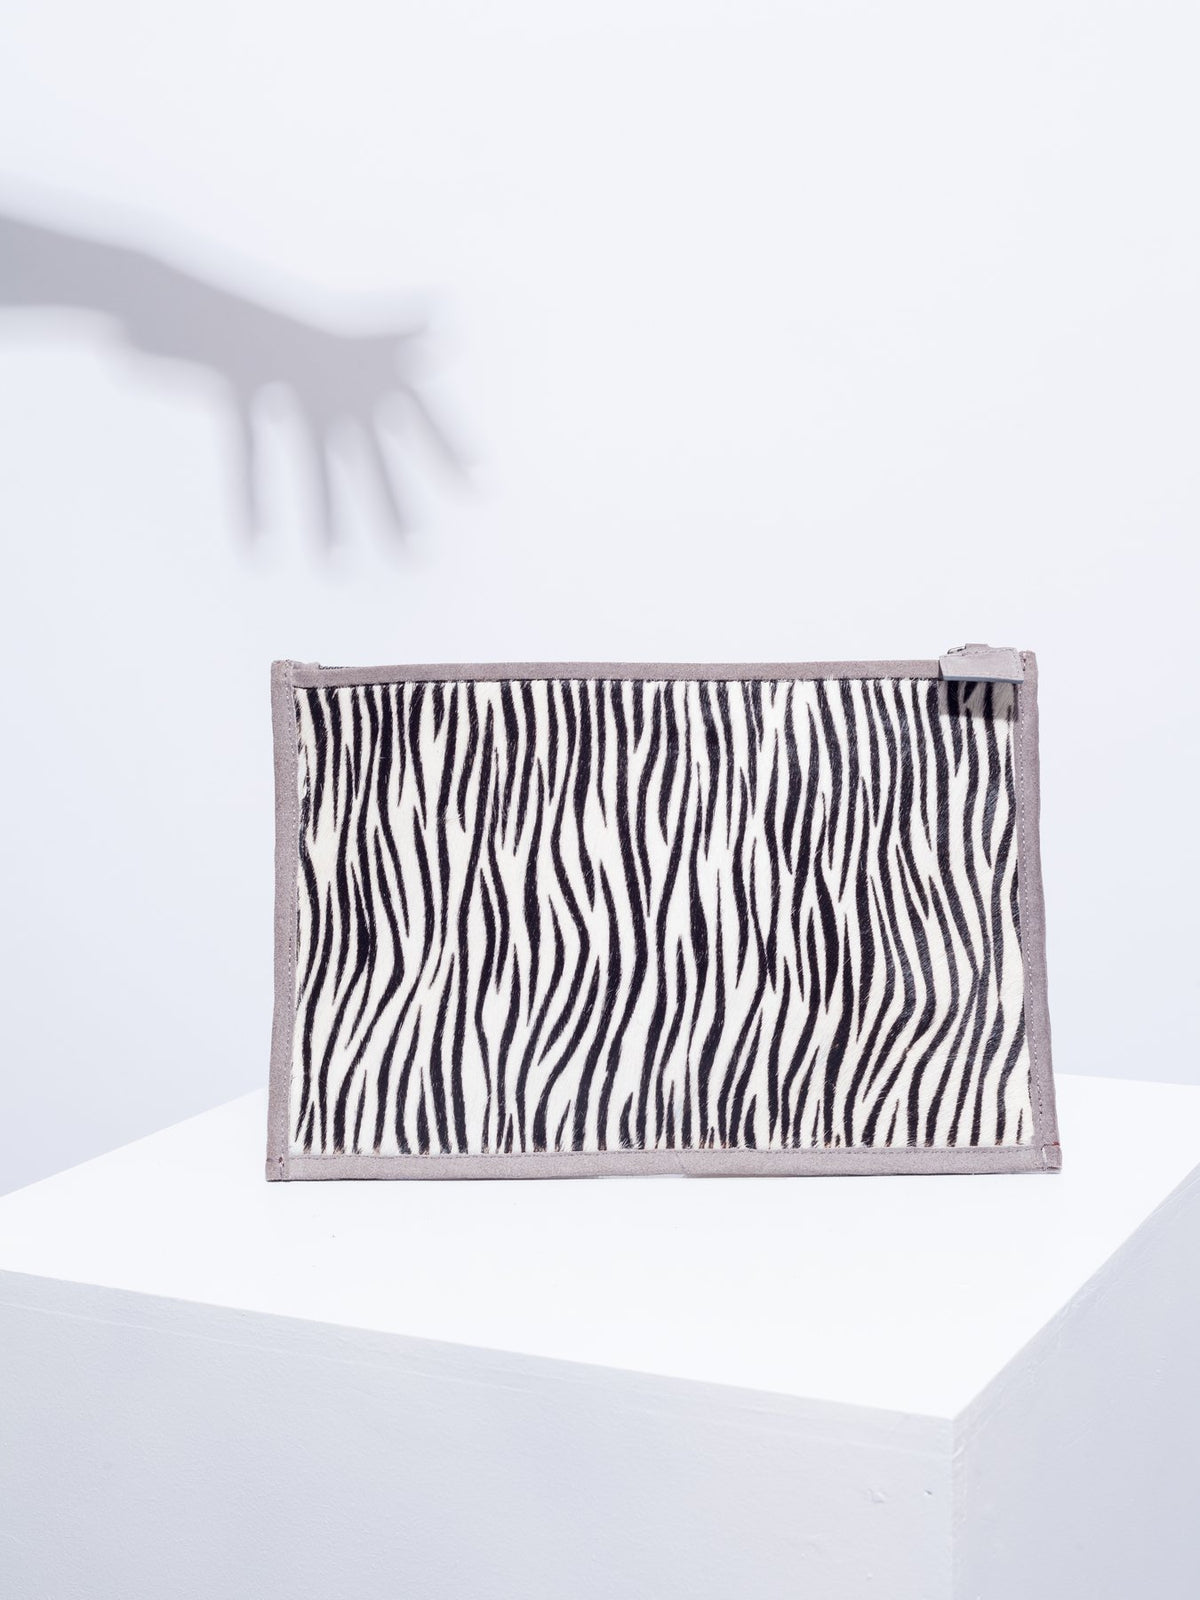 Red mirror leather and zebra clutch